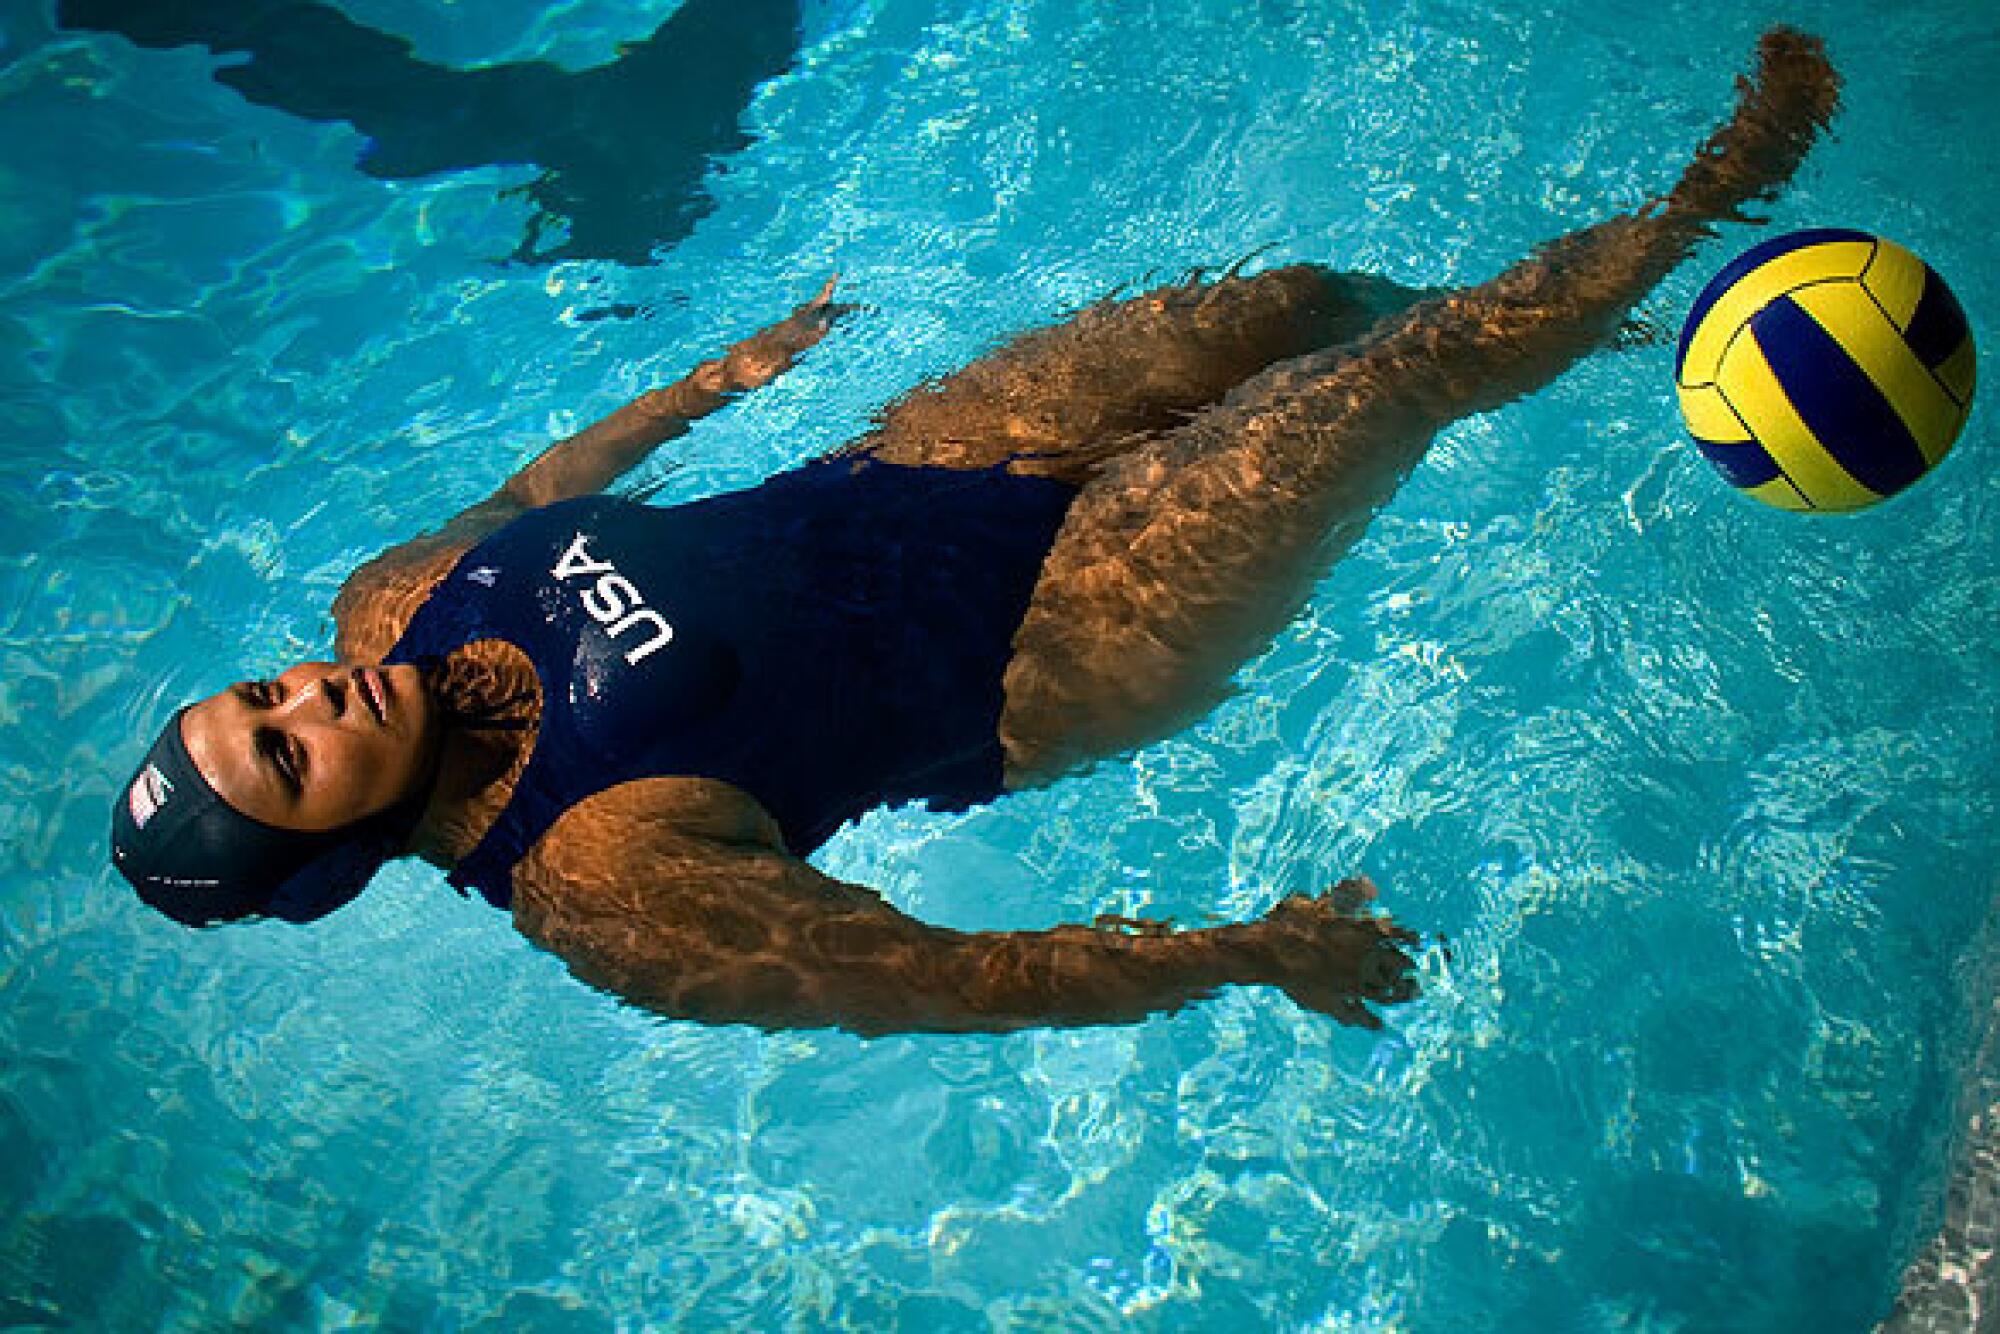 Brenda Villa was called the "Wayne Gretzky of women's water polo" by one coach.